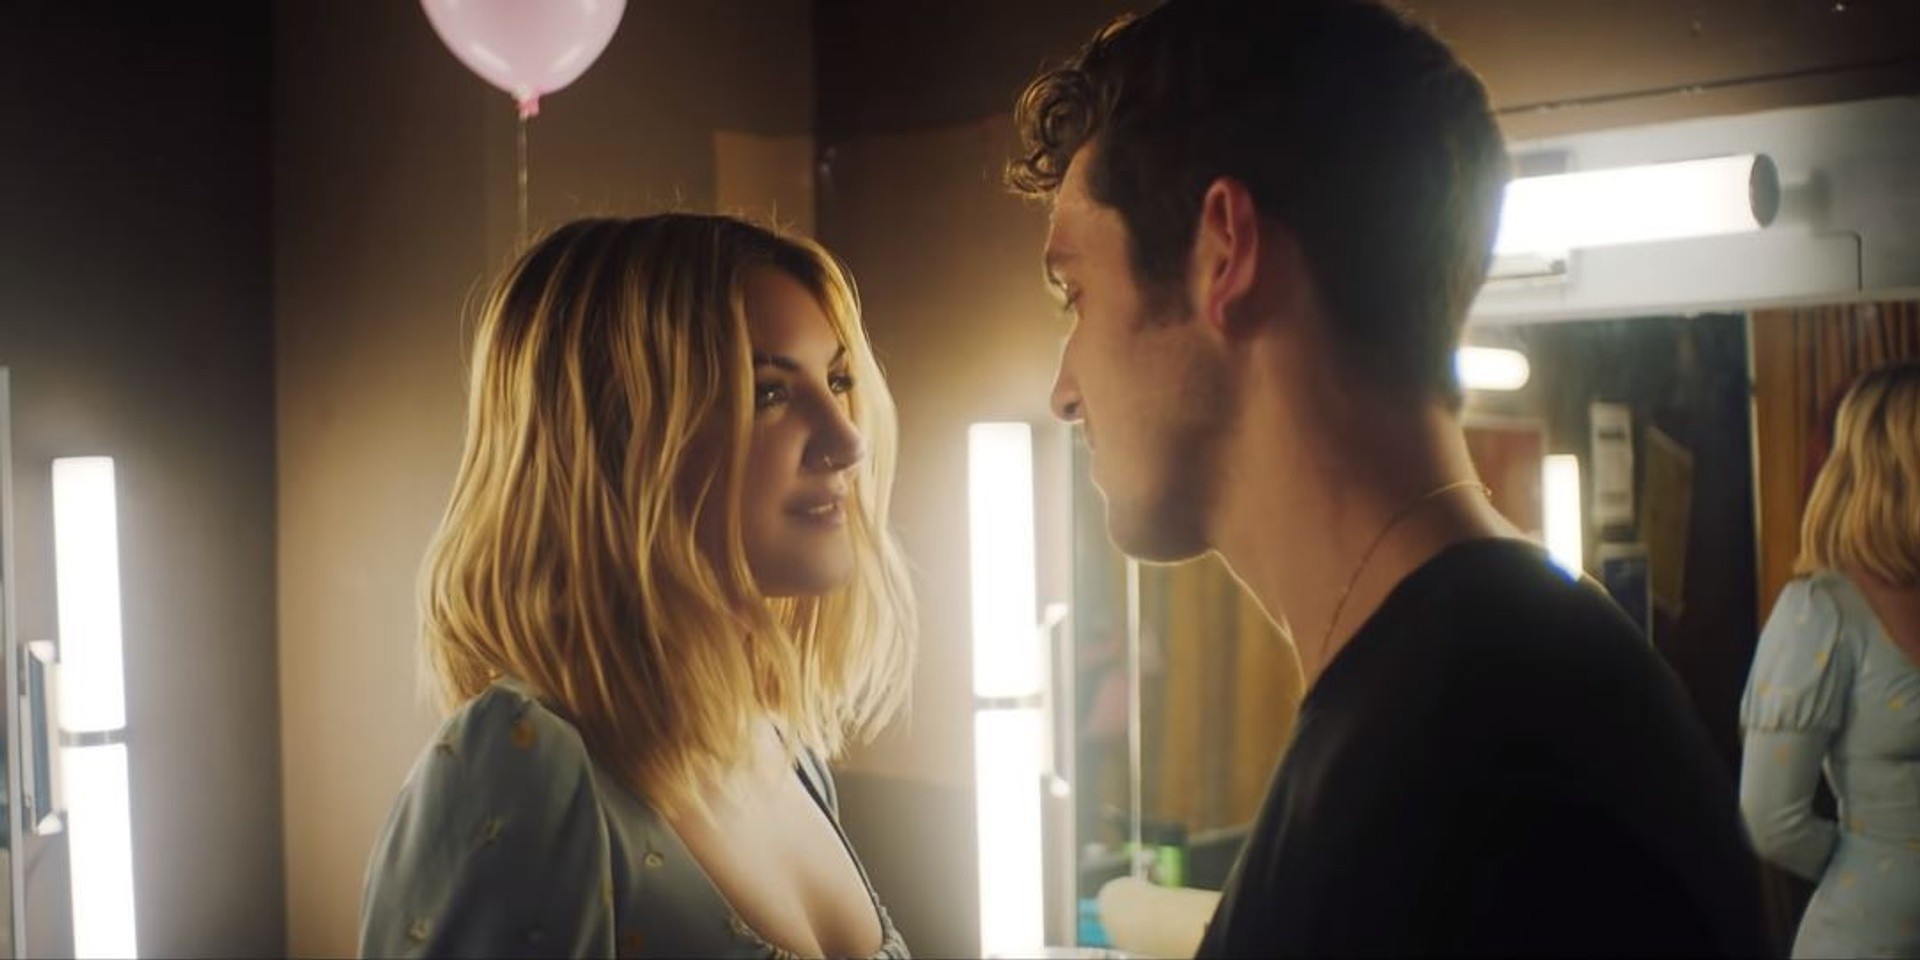 Lauv and Julia Michaels release bittersweet 'There's No Way' video – watch